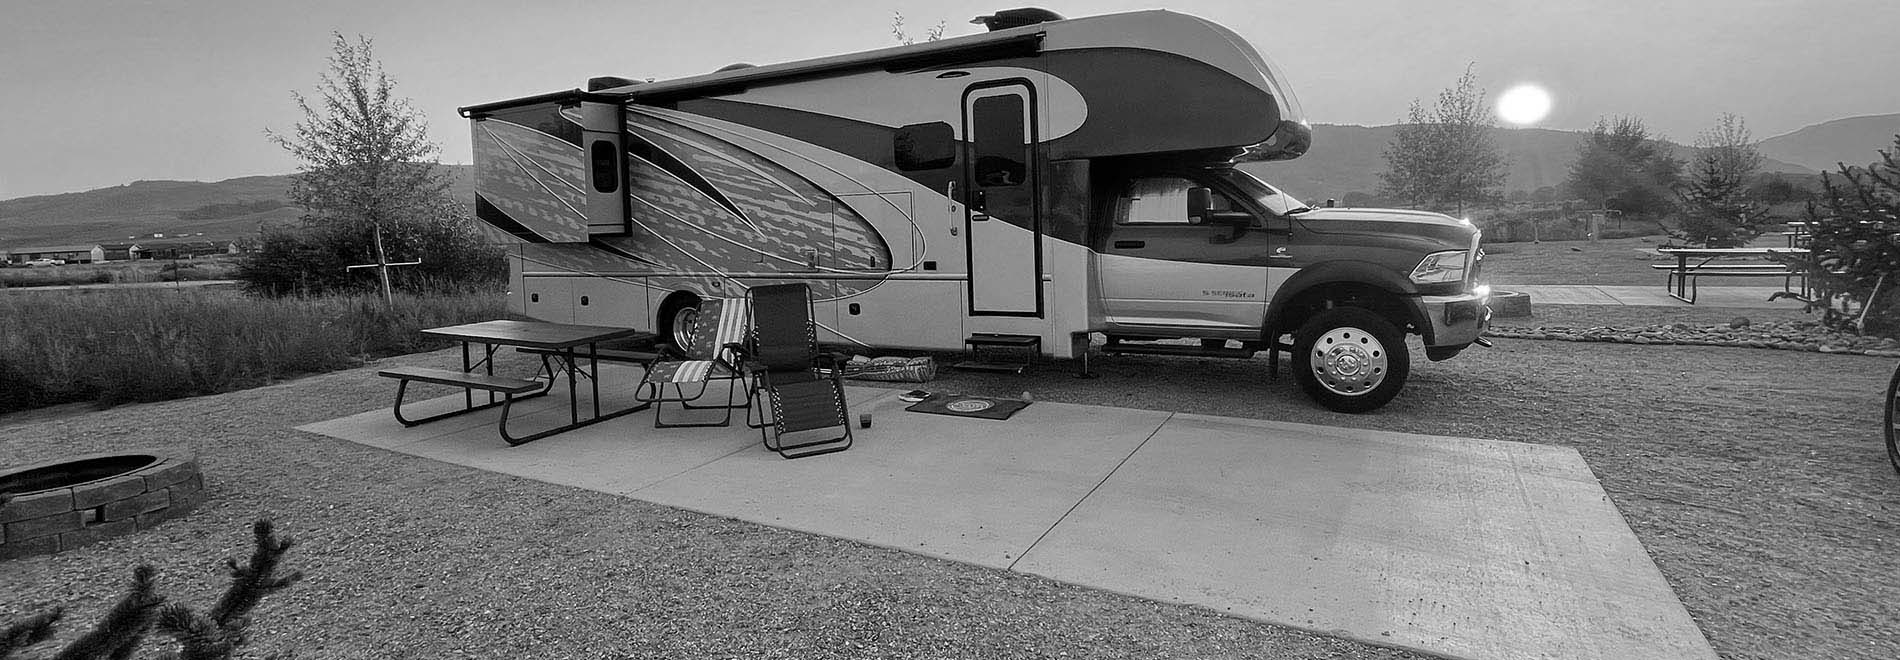 A User Submitted photo of aDynamaxMotorhome.